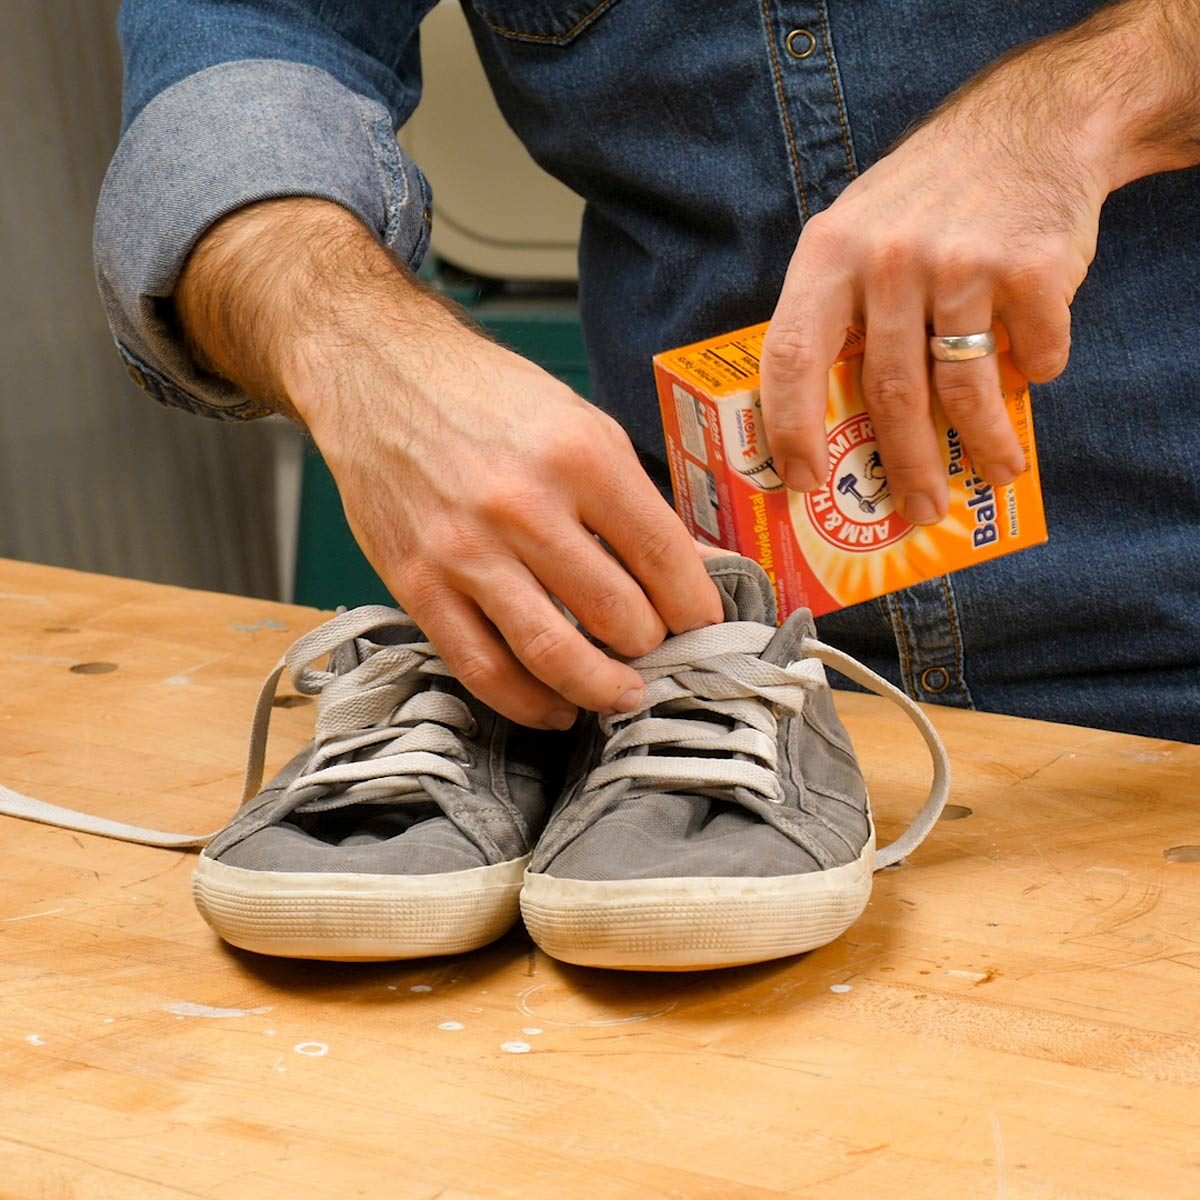 how to get stains out of shoes with baking soda